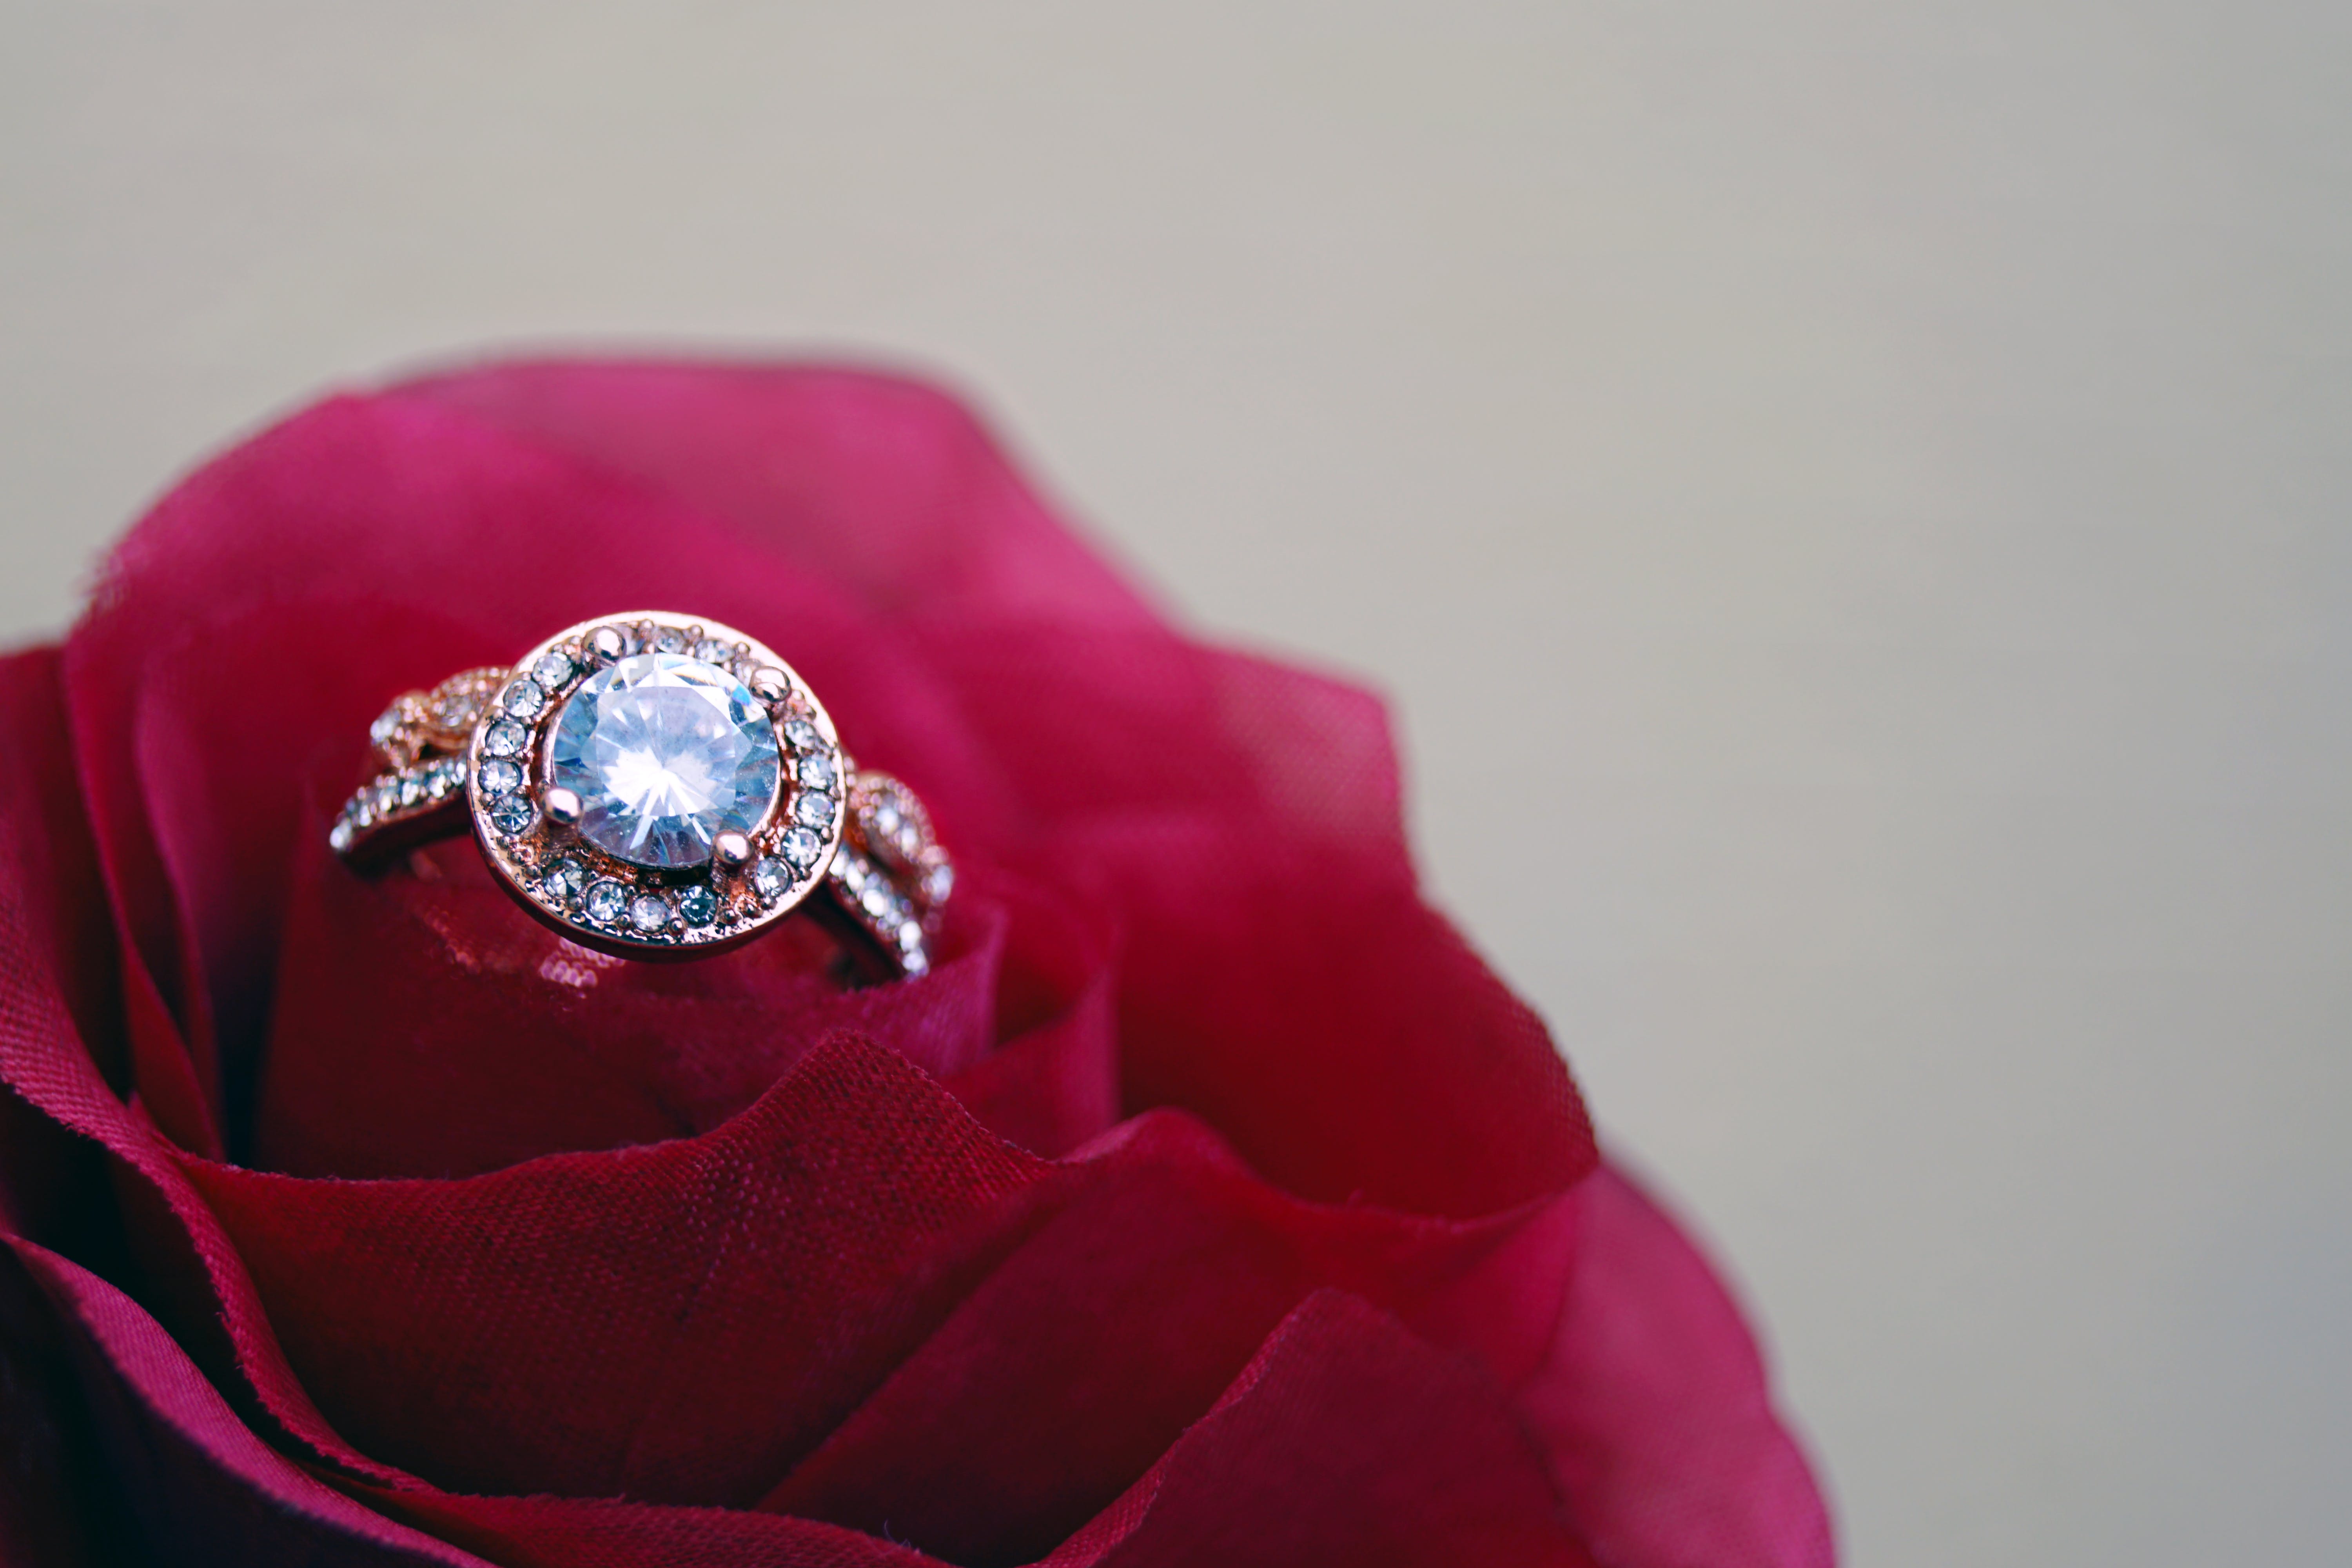 A close up of clear jeweled gold-colored cluster ring on a rose | Source: Pexels